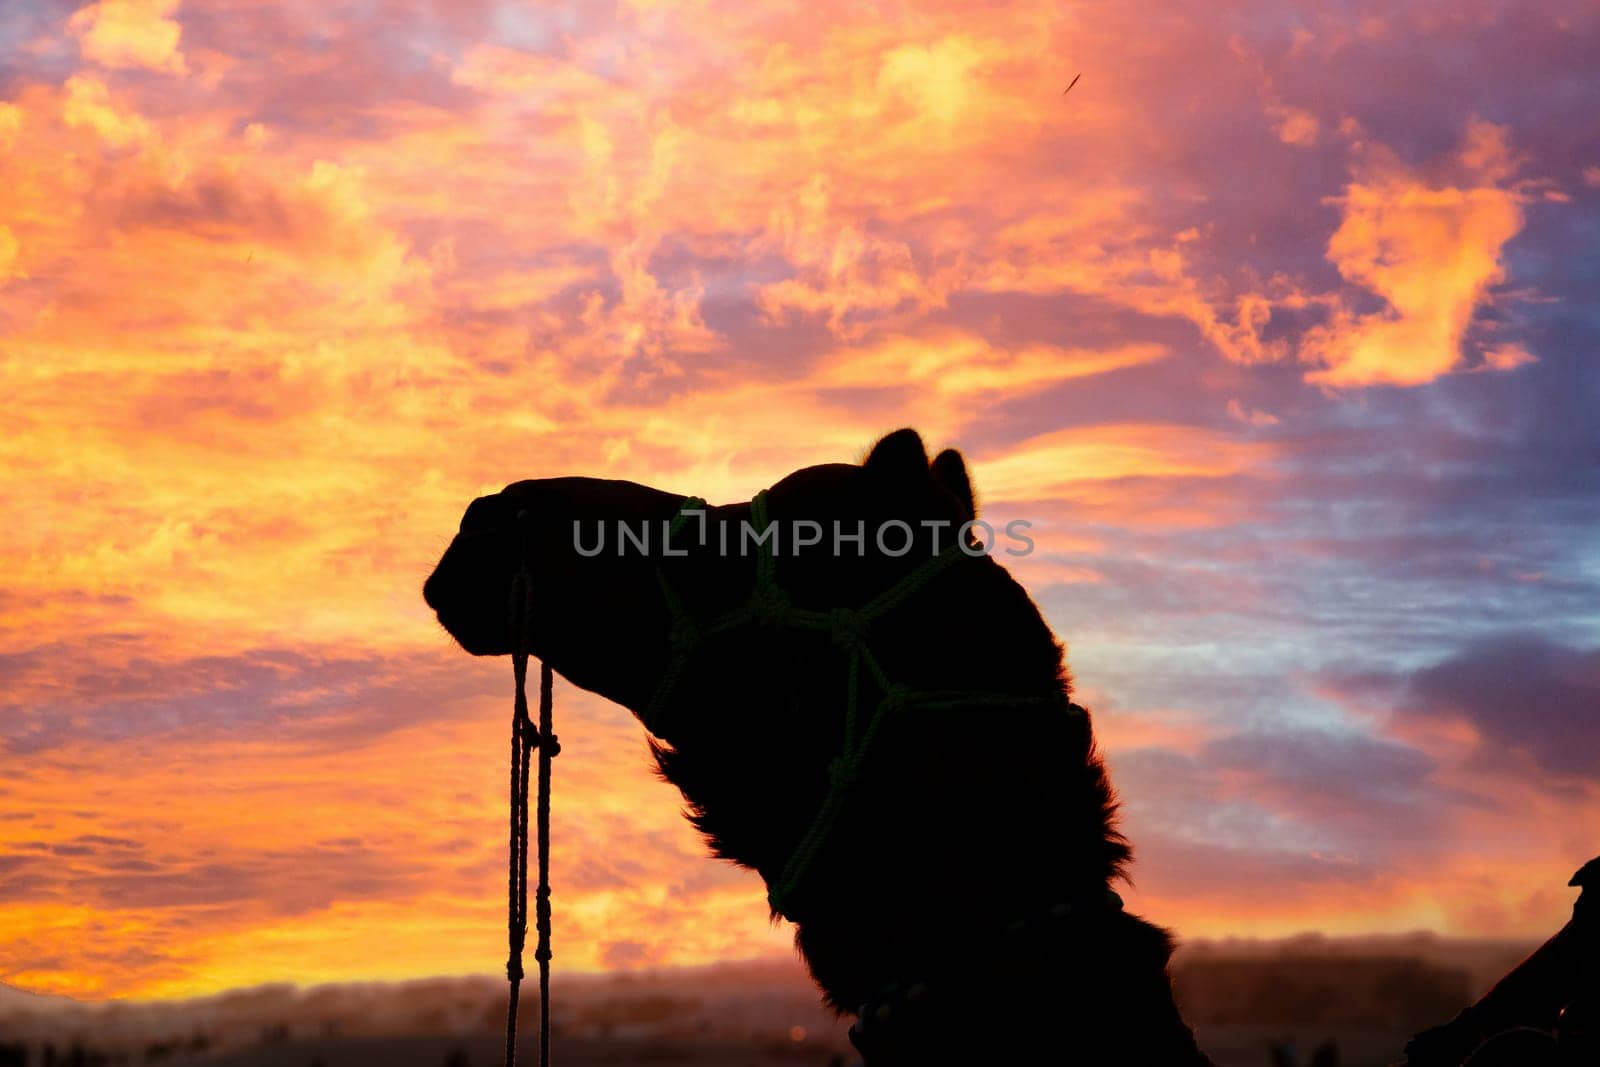 Silhouette of camel with the sun right behind it in sand dunes in Sam Jaisalmer Rajasthan India